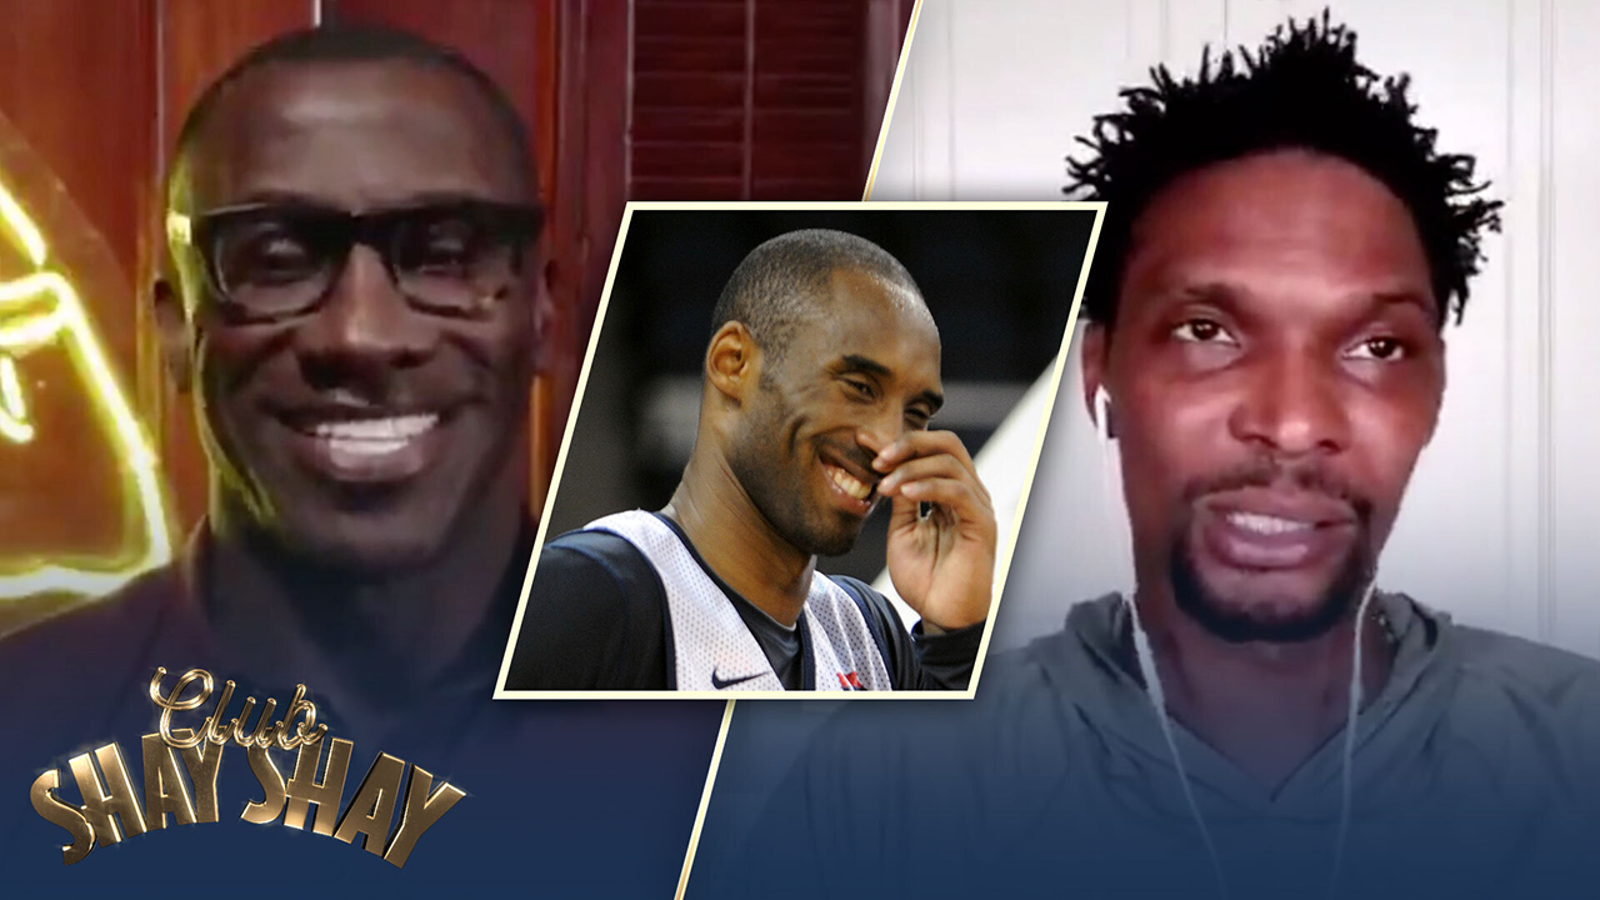 Chris Bosh on his memories of Kobe from the 2008 Olympic "Redeem Team" | EPISODE 4 | CLUB SHAY SHAY